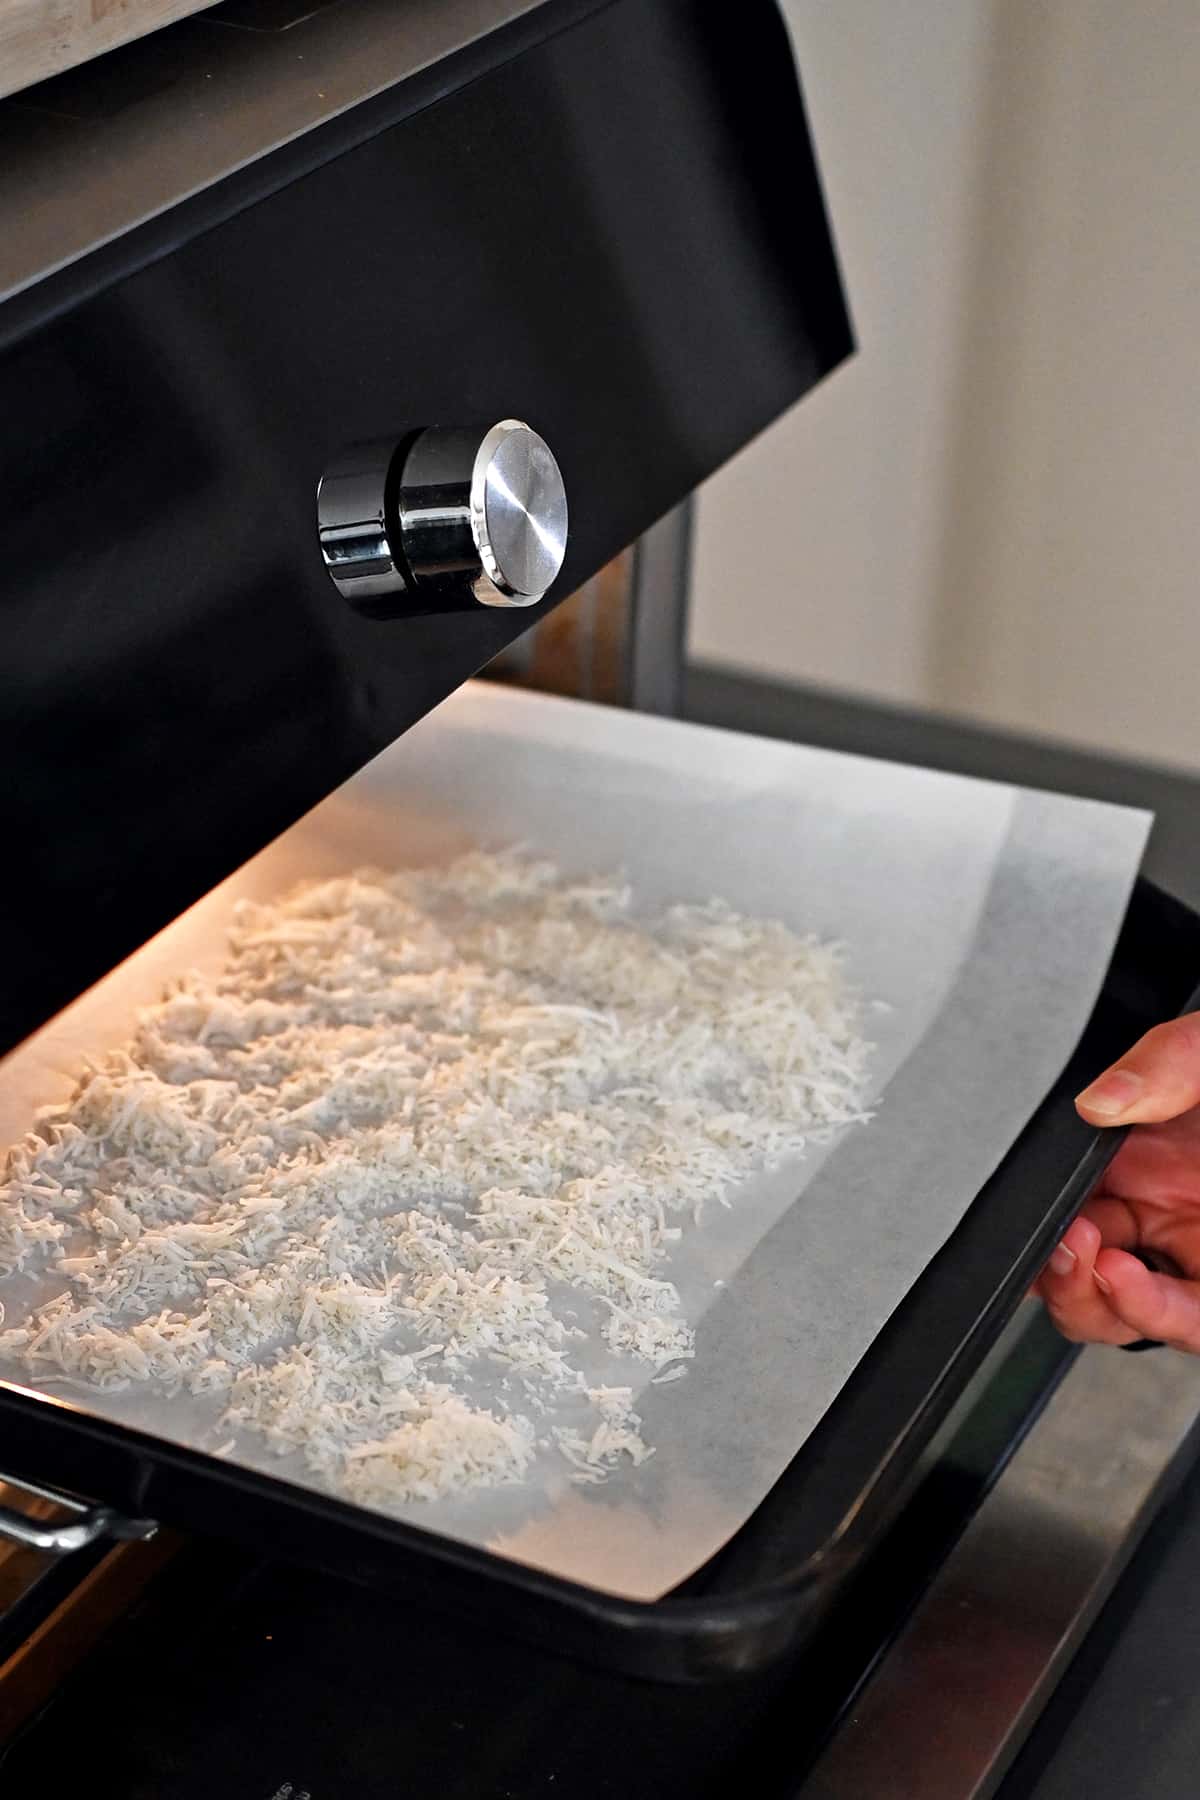 A rimmed baking sheet with a layer of shredded coconut is placed in a toaster oven.